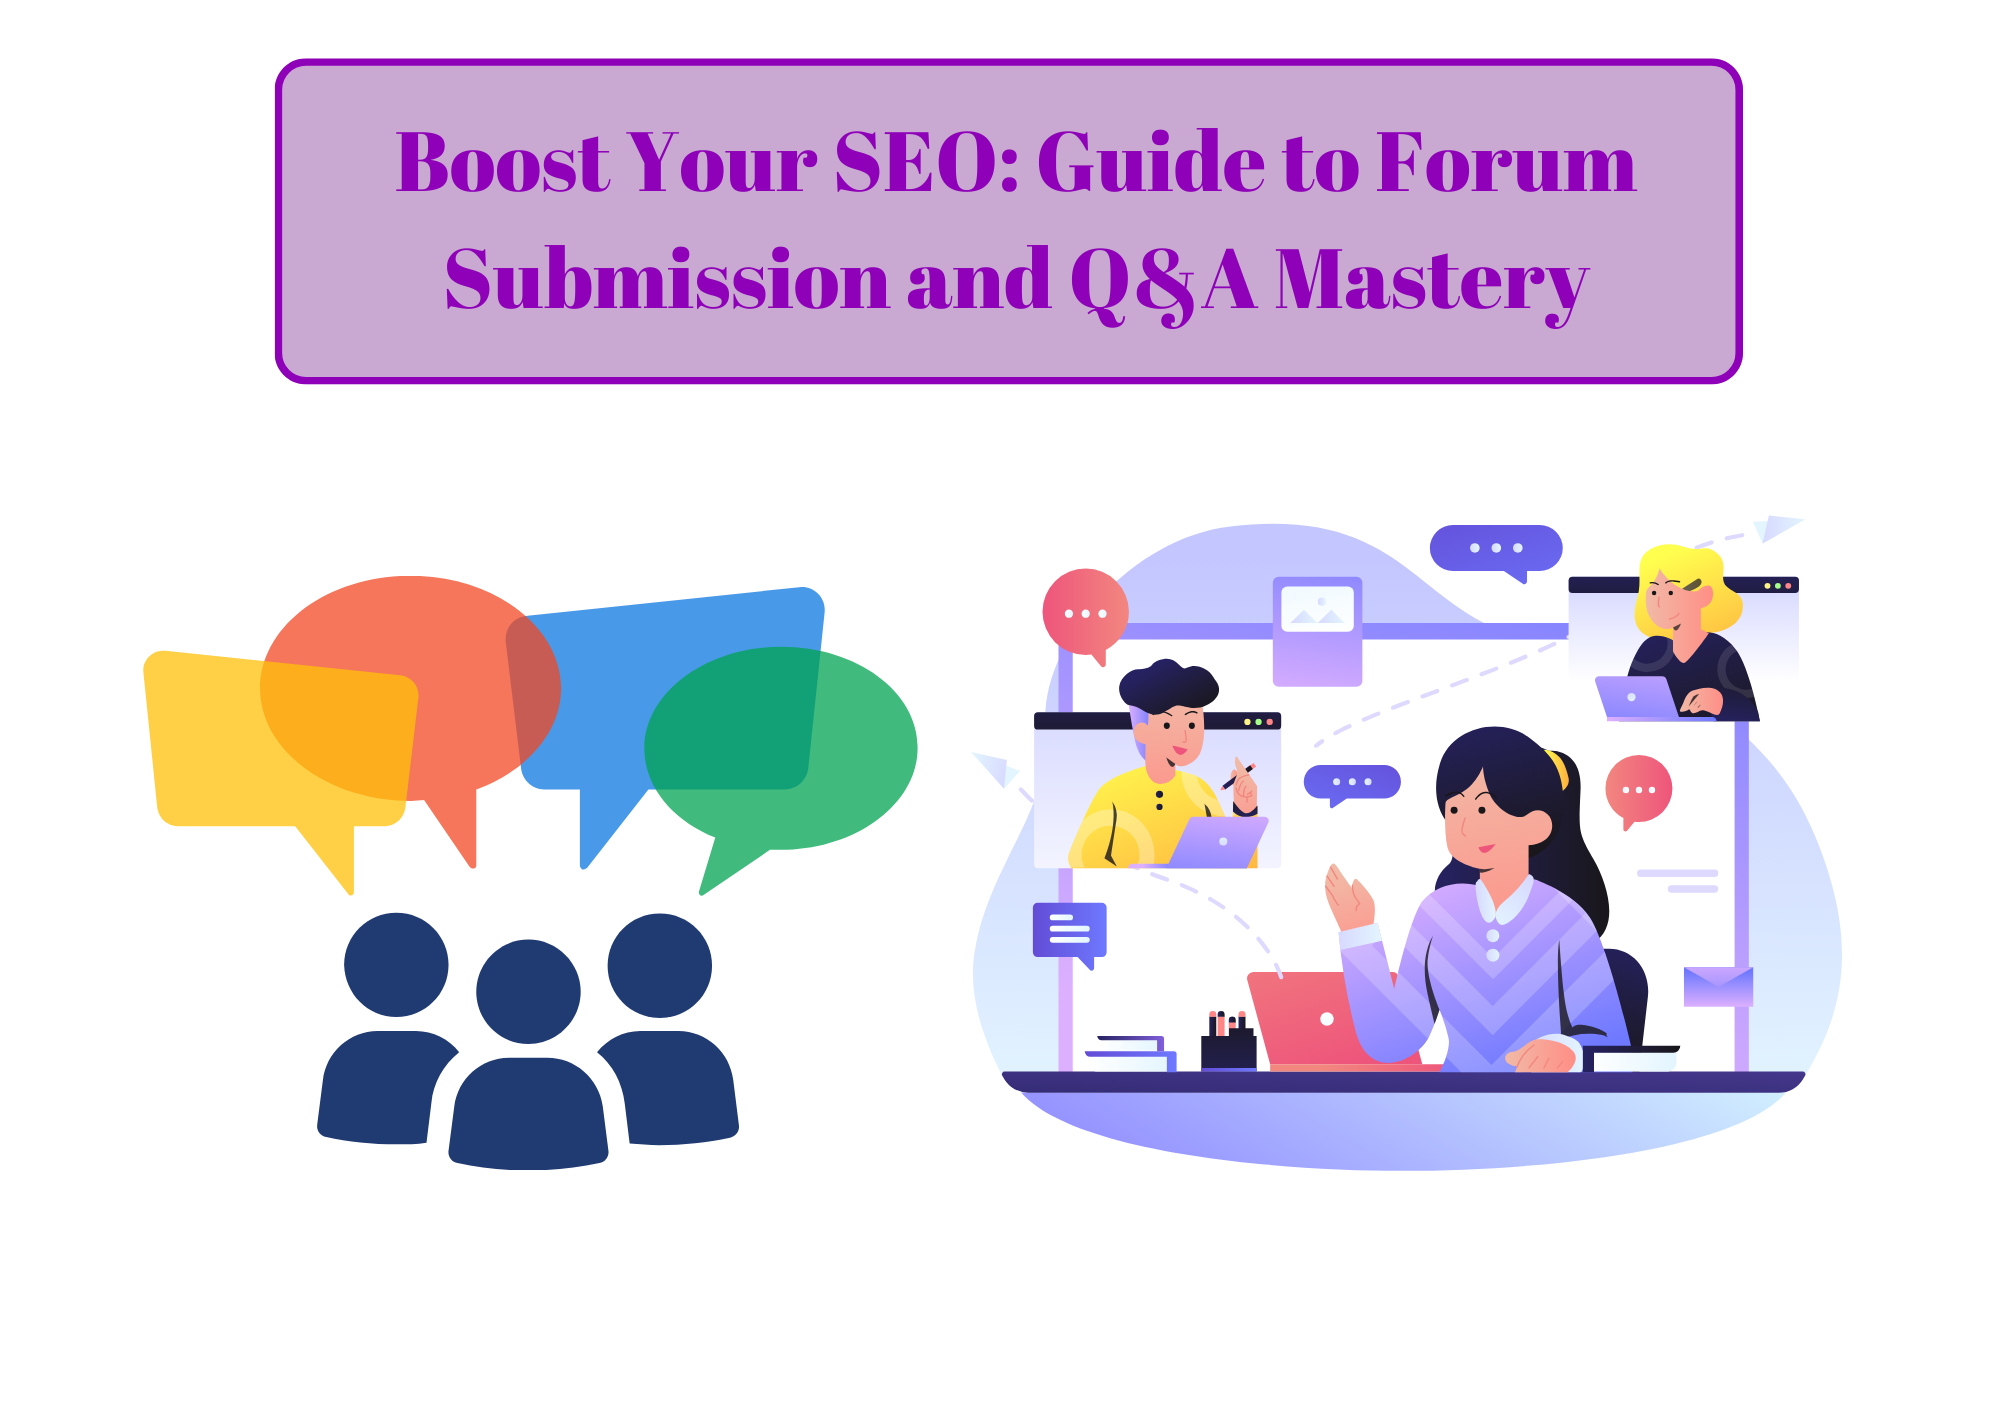 Boost Your SEO Guide to Forum Submission and Q&A Mastery